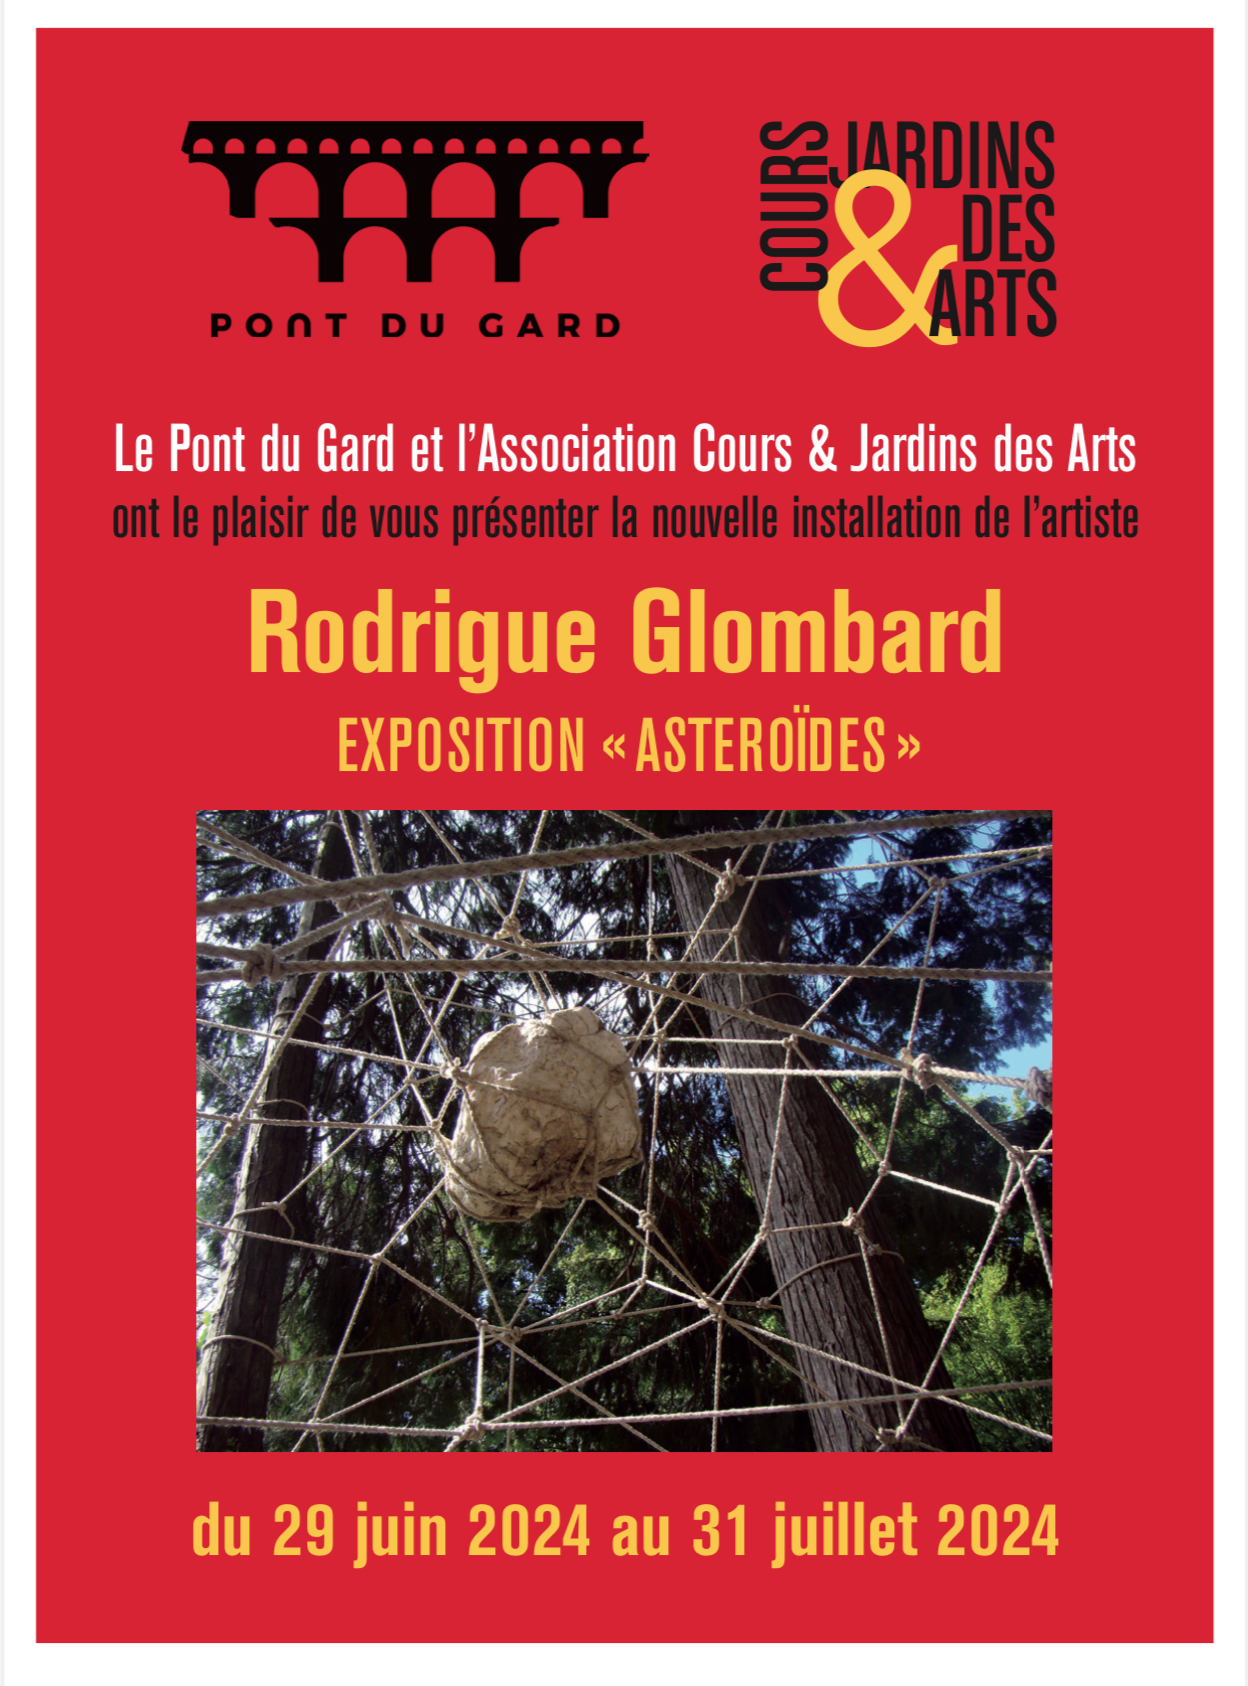 EXPOSITION « ASTEROÏDES » Rodrigue Glombard